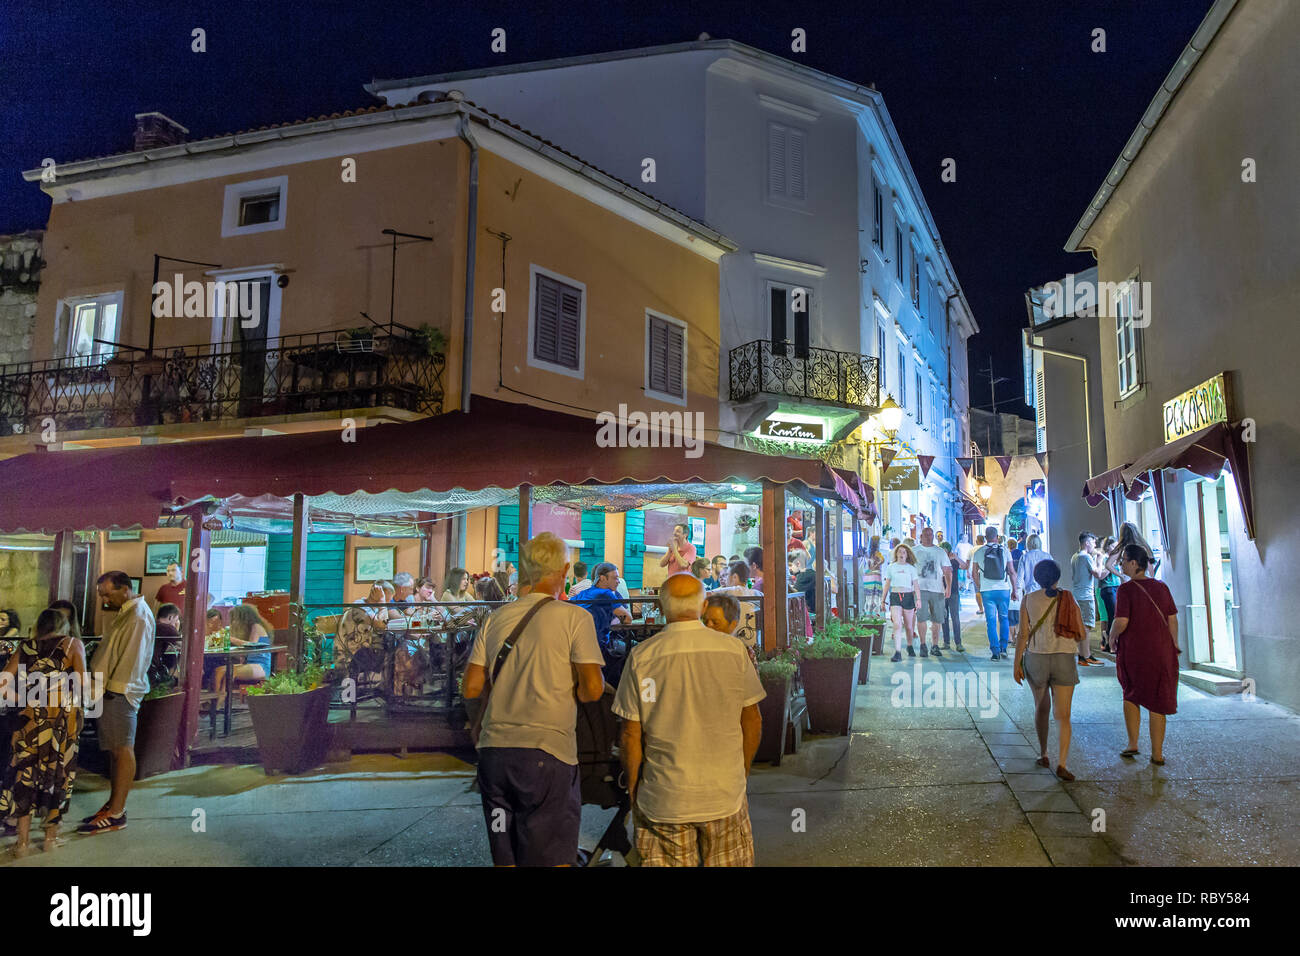 Tourists dine outdoors in the evening in a restaurantat at the head of a traditional narrow street in Krk, Kvarner, Croatia. Stock Photo